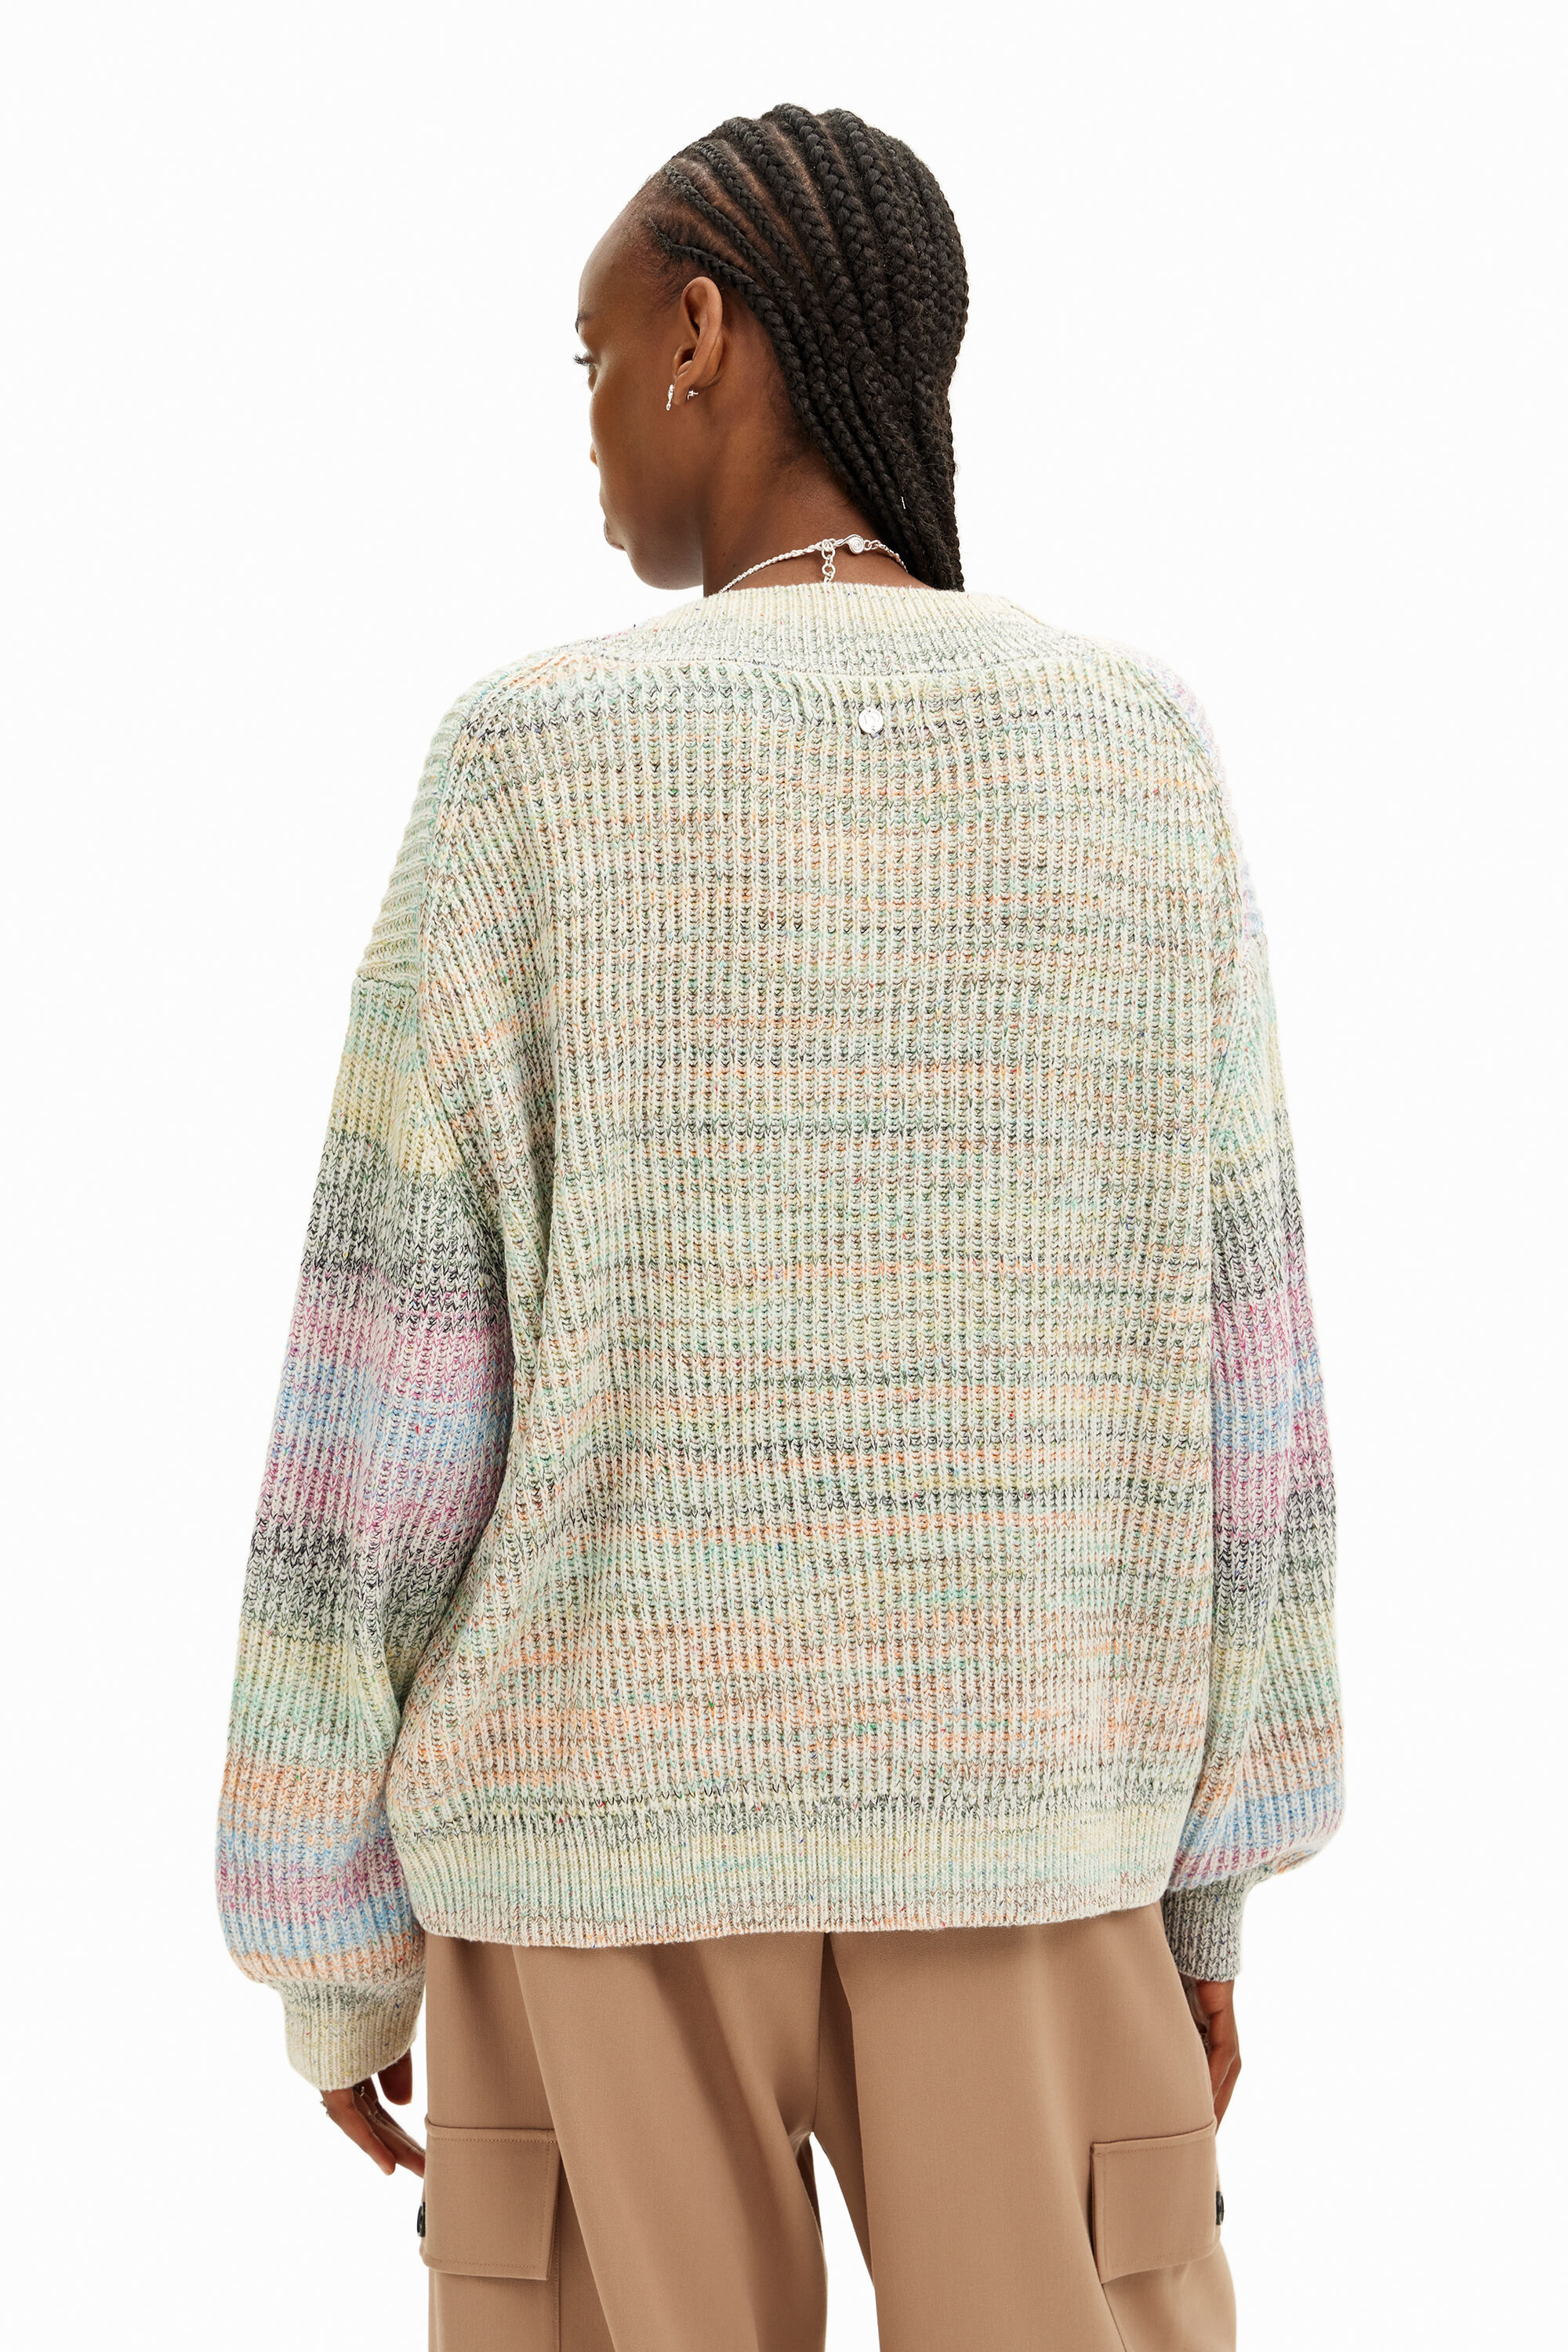 Shop Desigual Multicolored Cardigan In Material Finishes